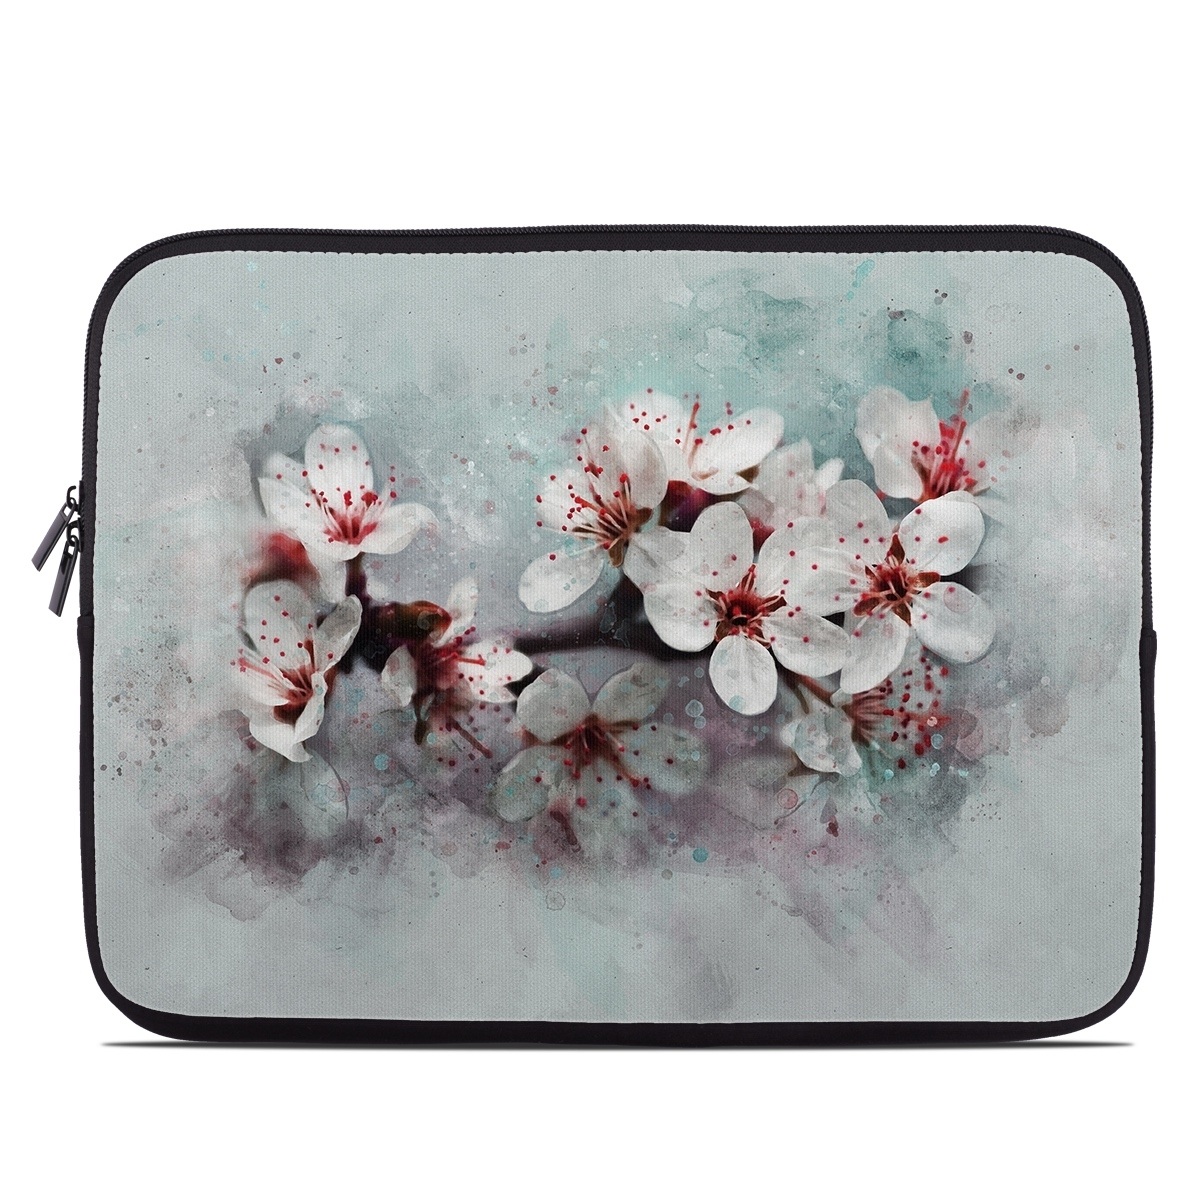 Laptop Sleeve - Cherry Blossoms (Image 1)